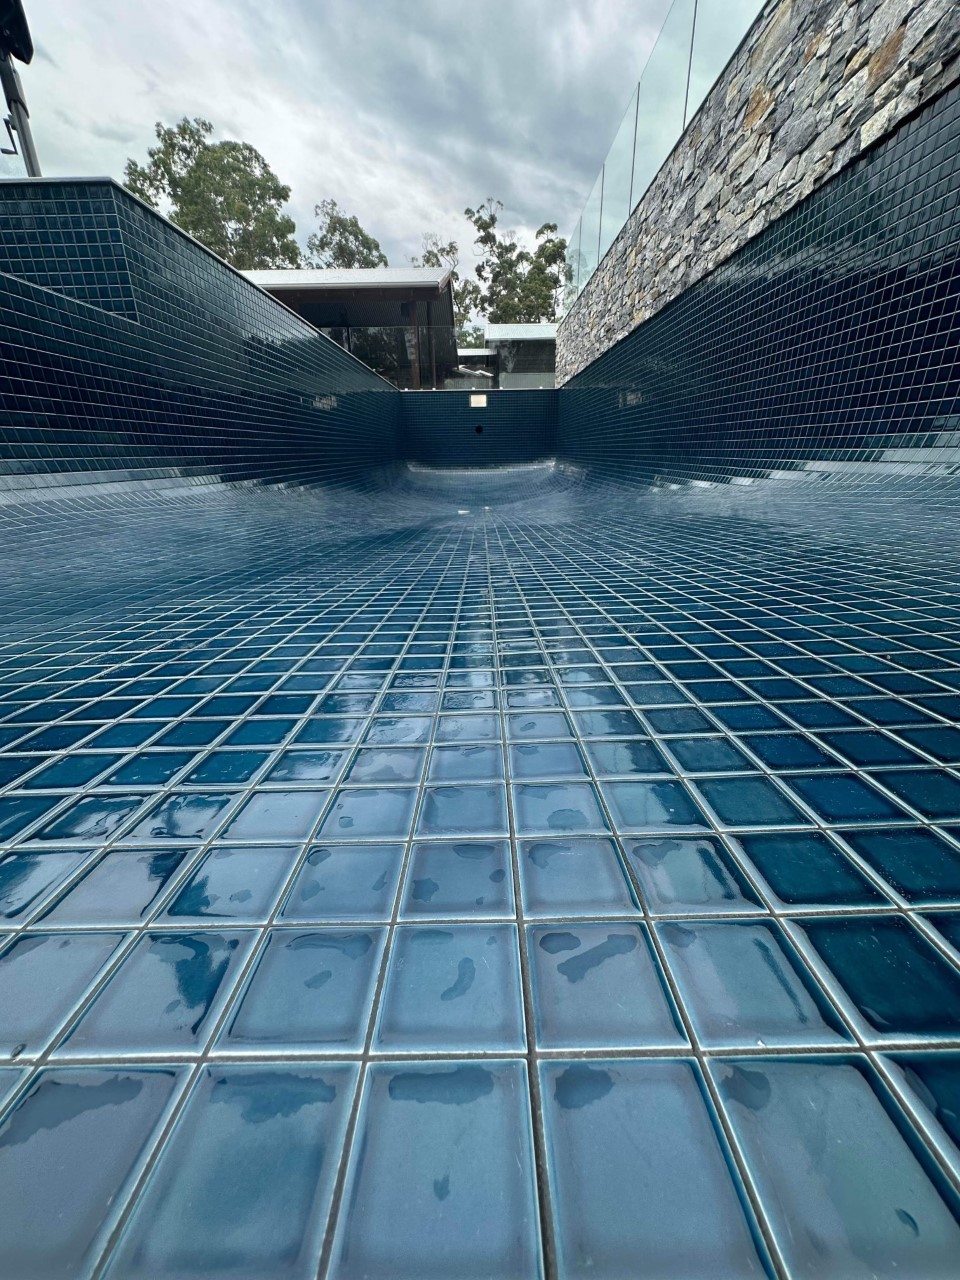 Empty pool with shiny blue tiles